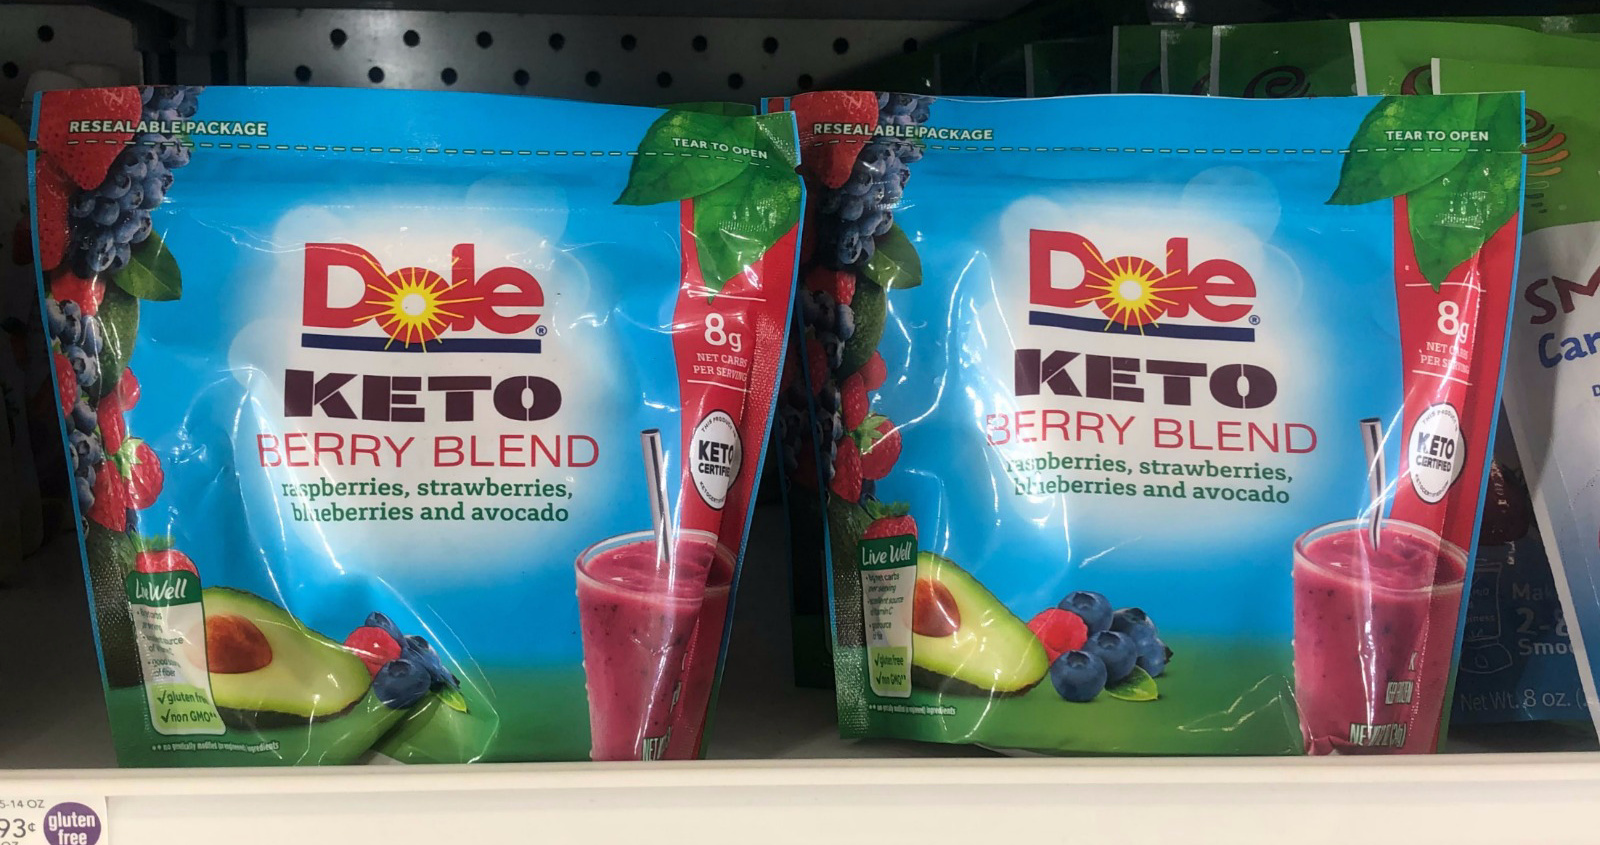 Find New Dole® Keto Berry Blend At Your Local Publix on I Heart Publix